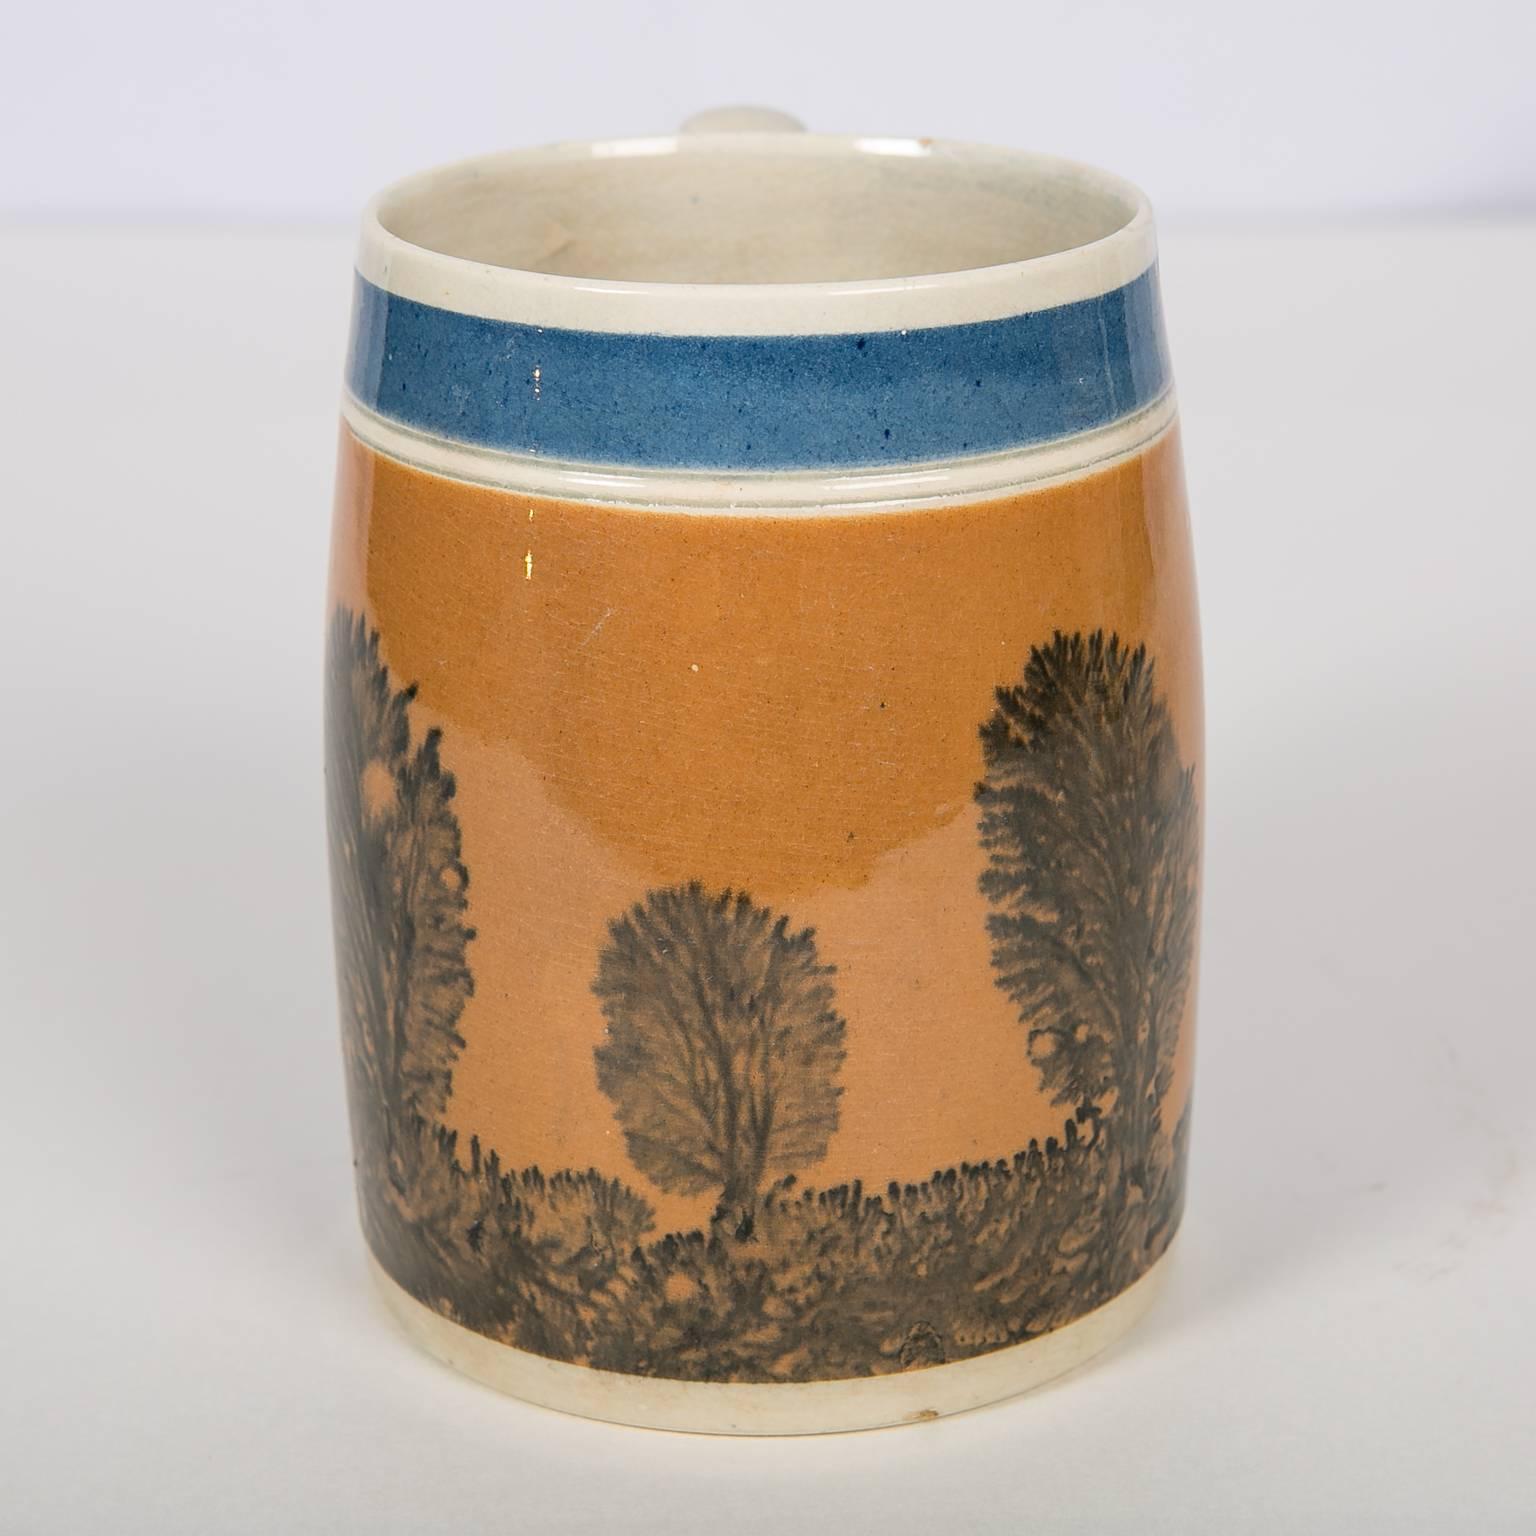 Antique Mochaware Mug Decorated with 